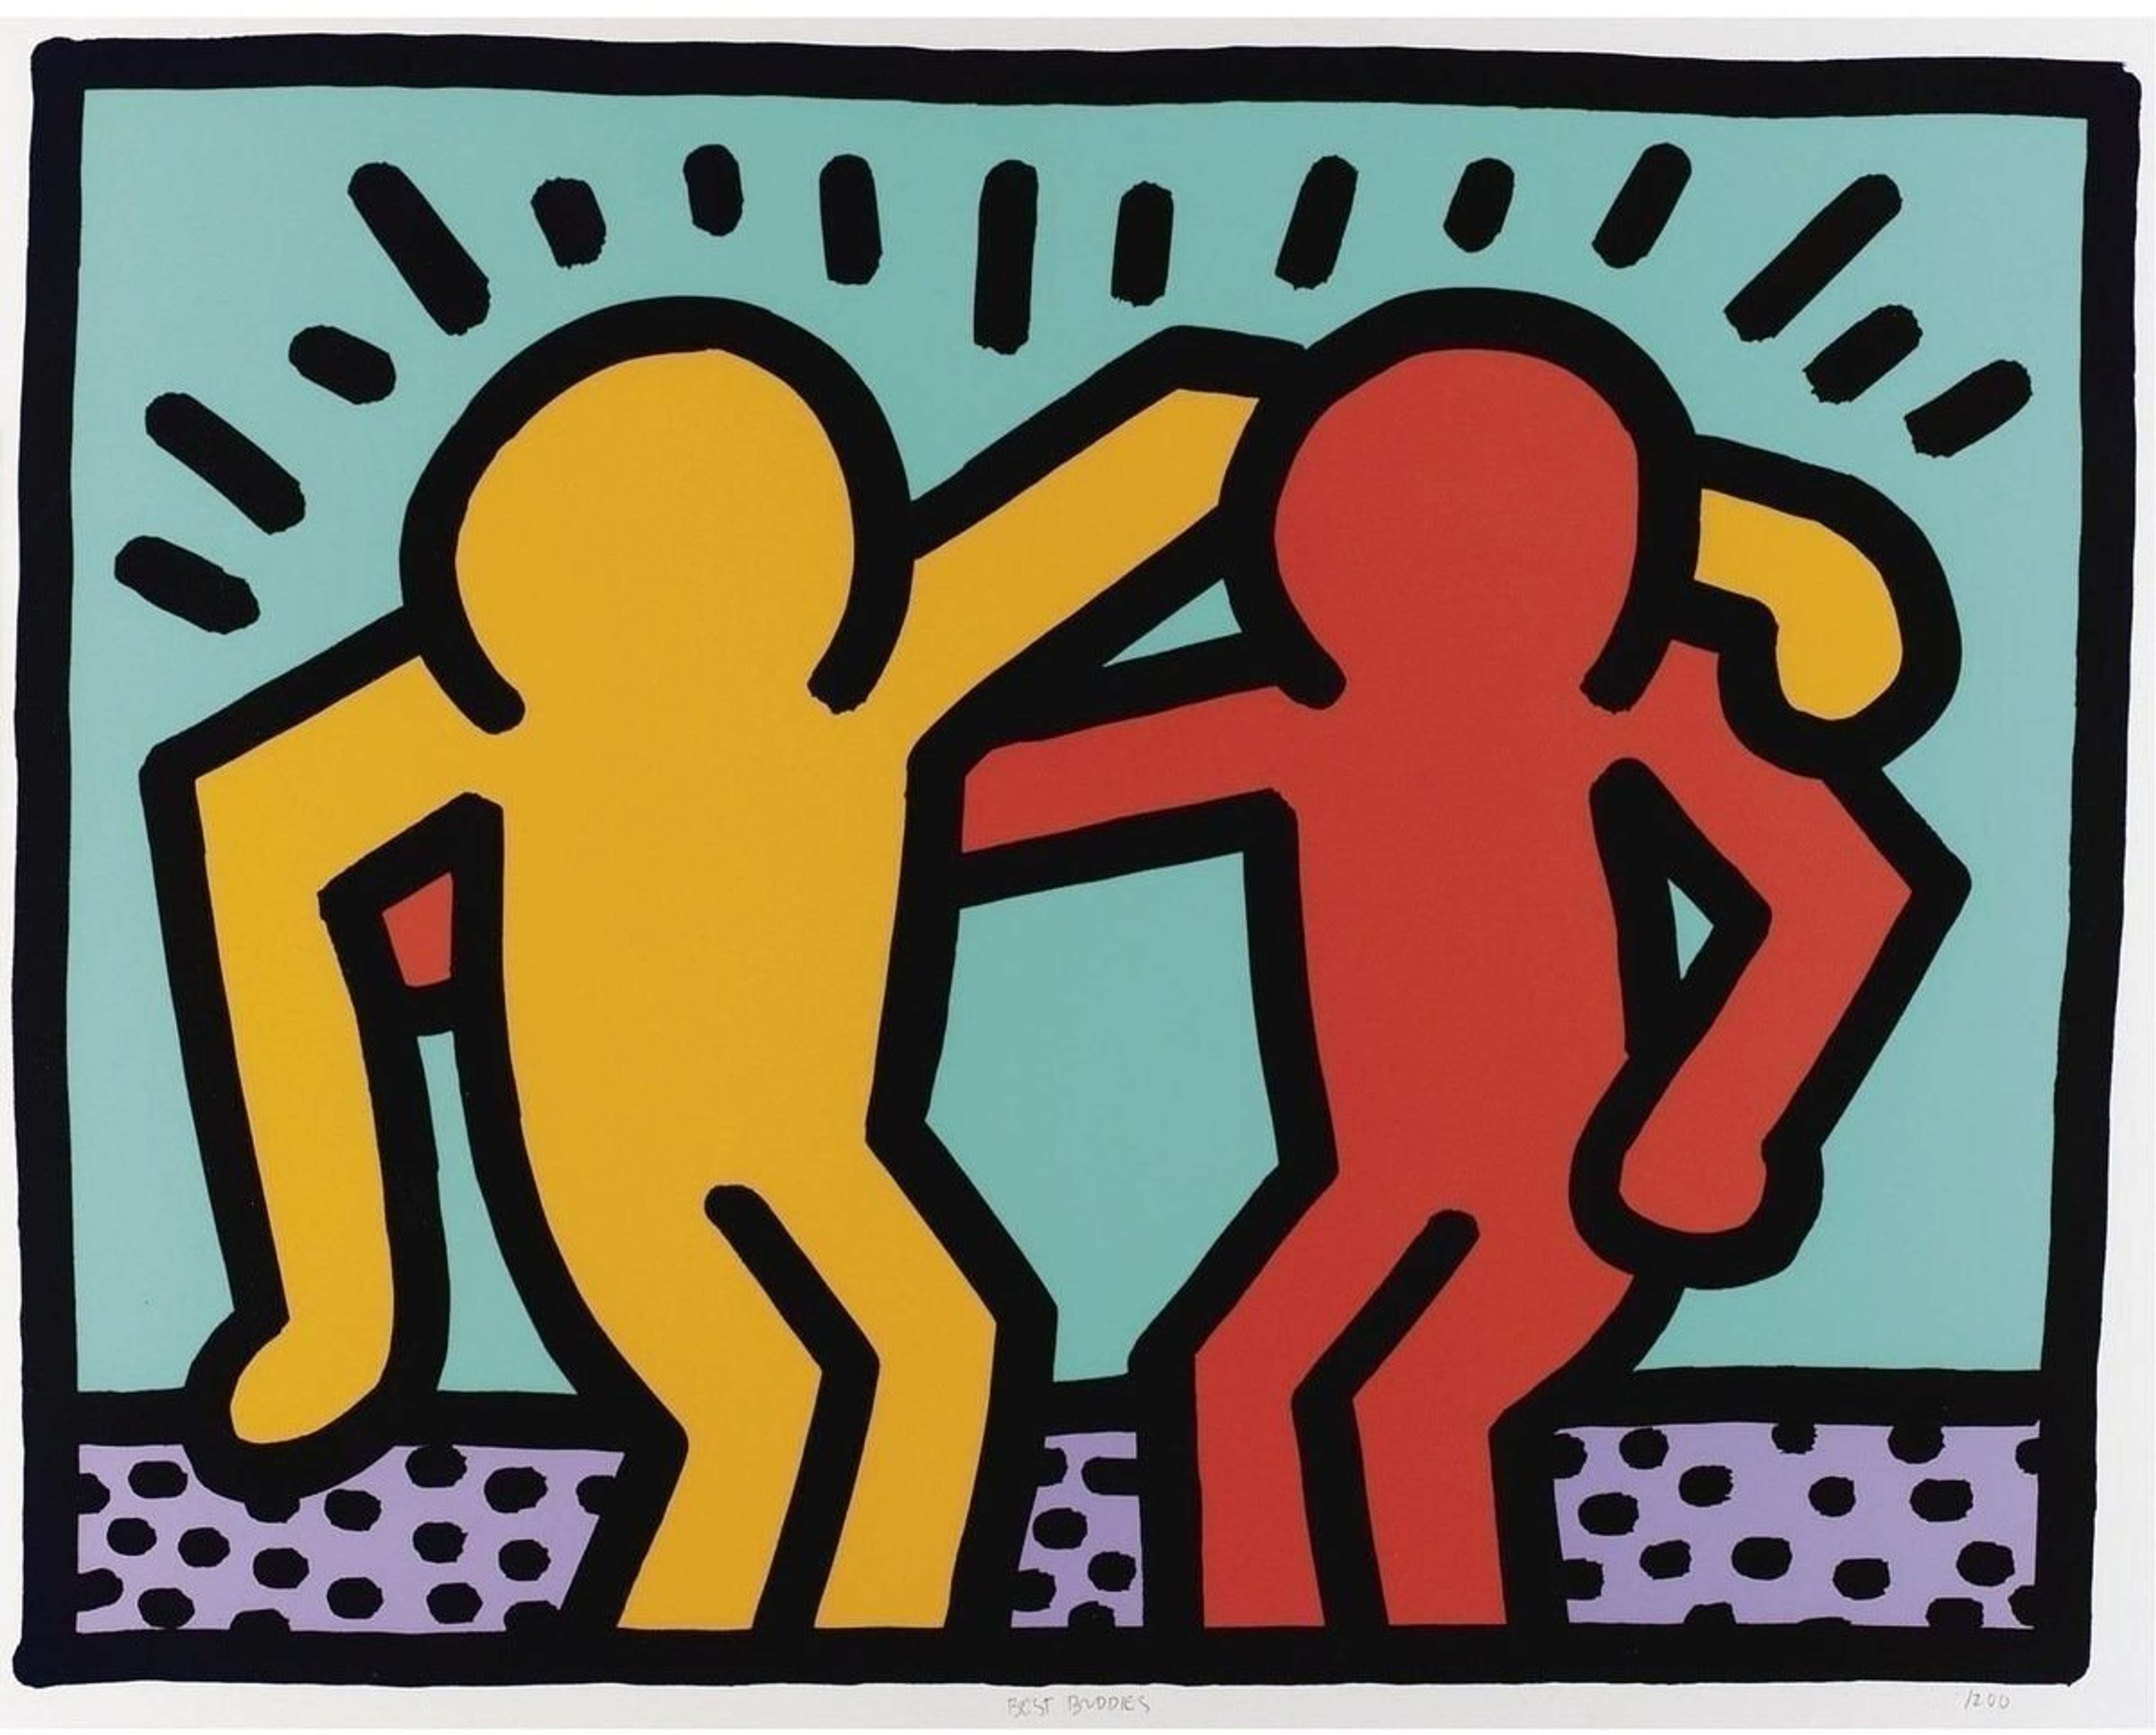 Best Buddies by Keith Haring